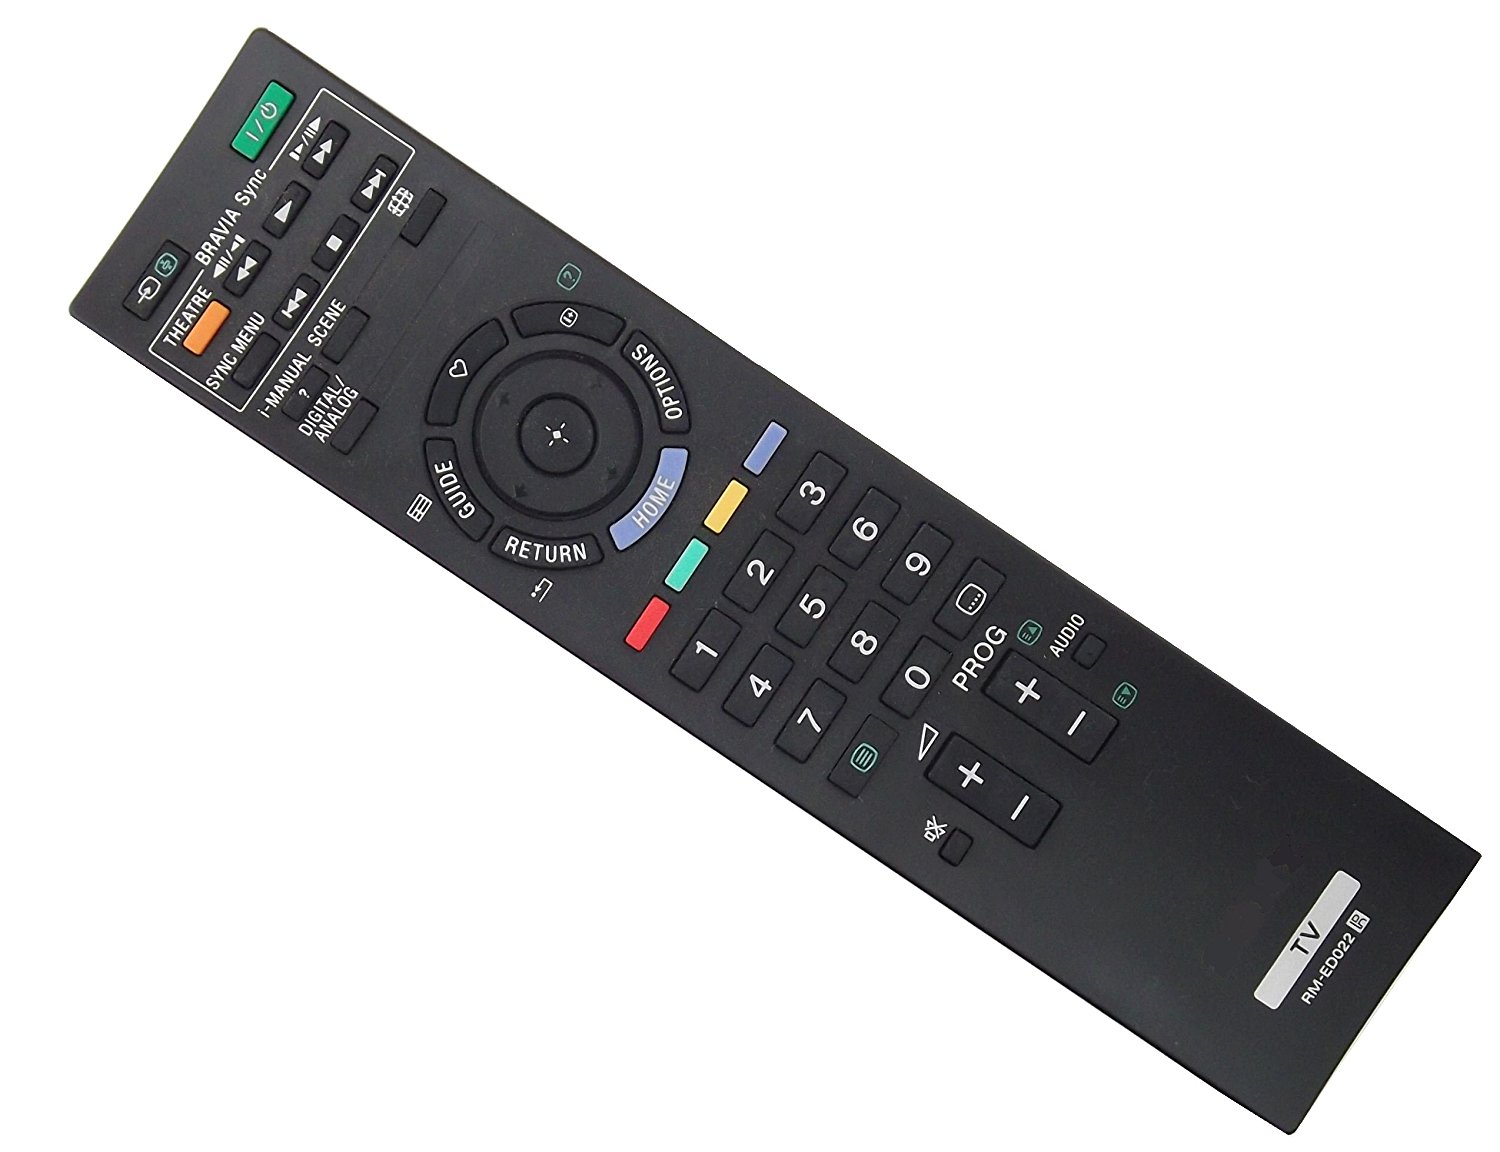 Sony TV remote battery cover